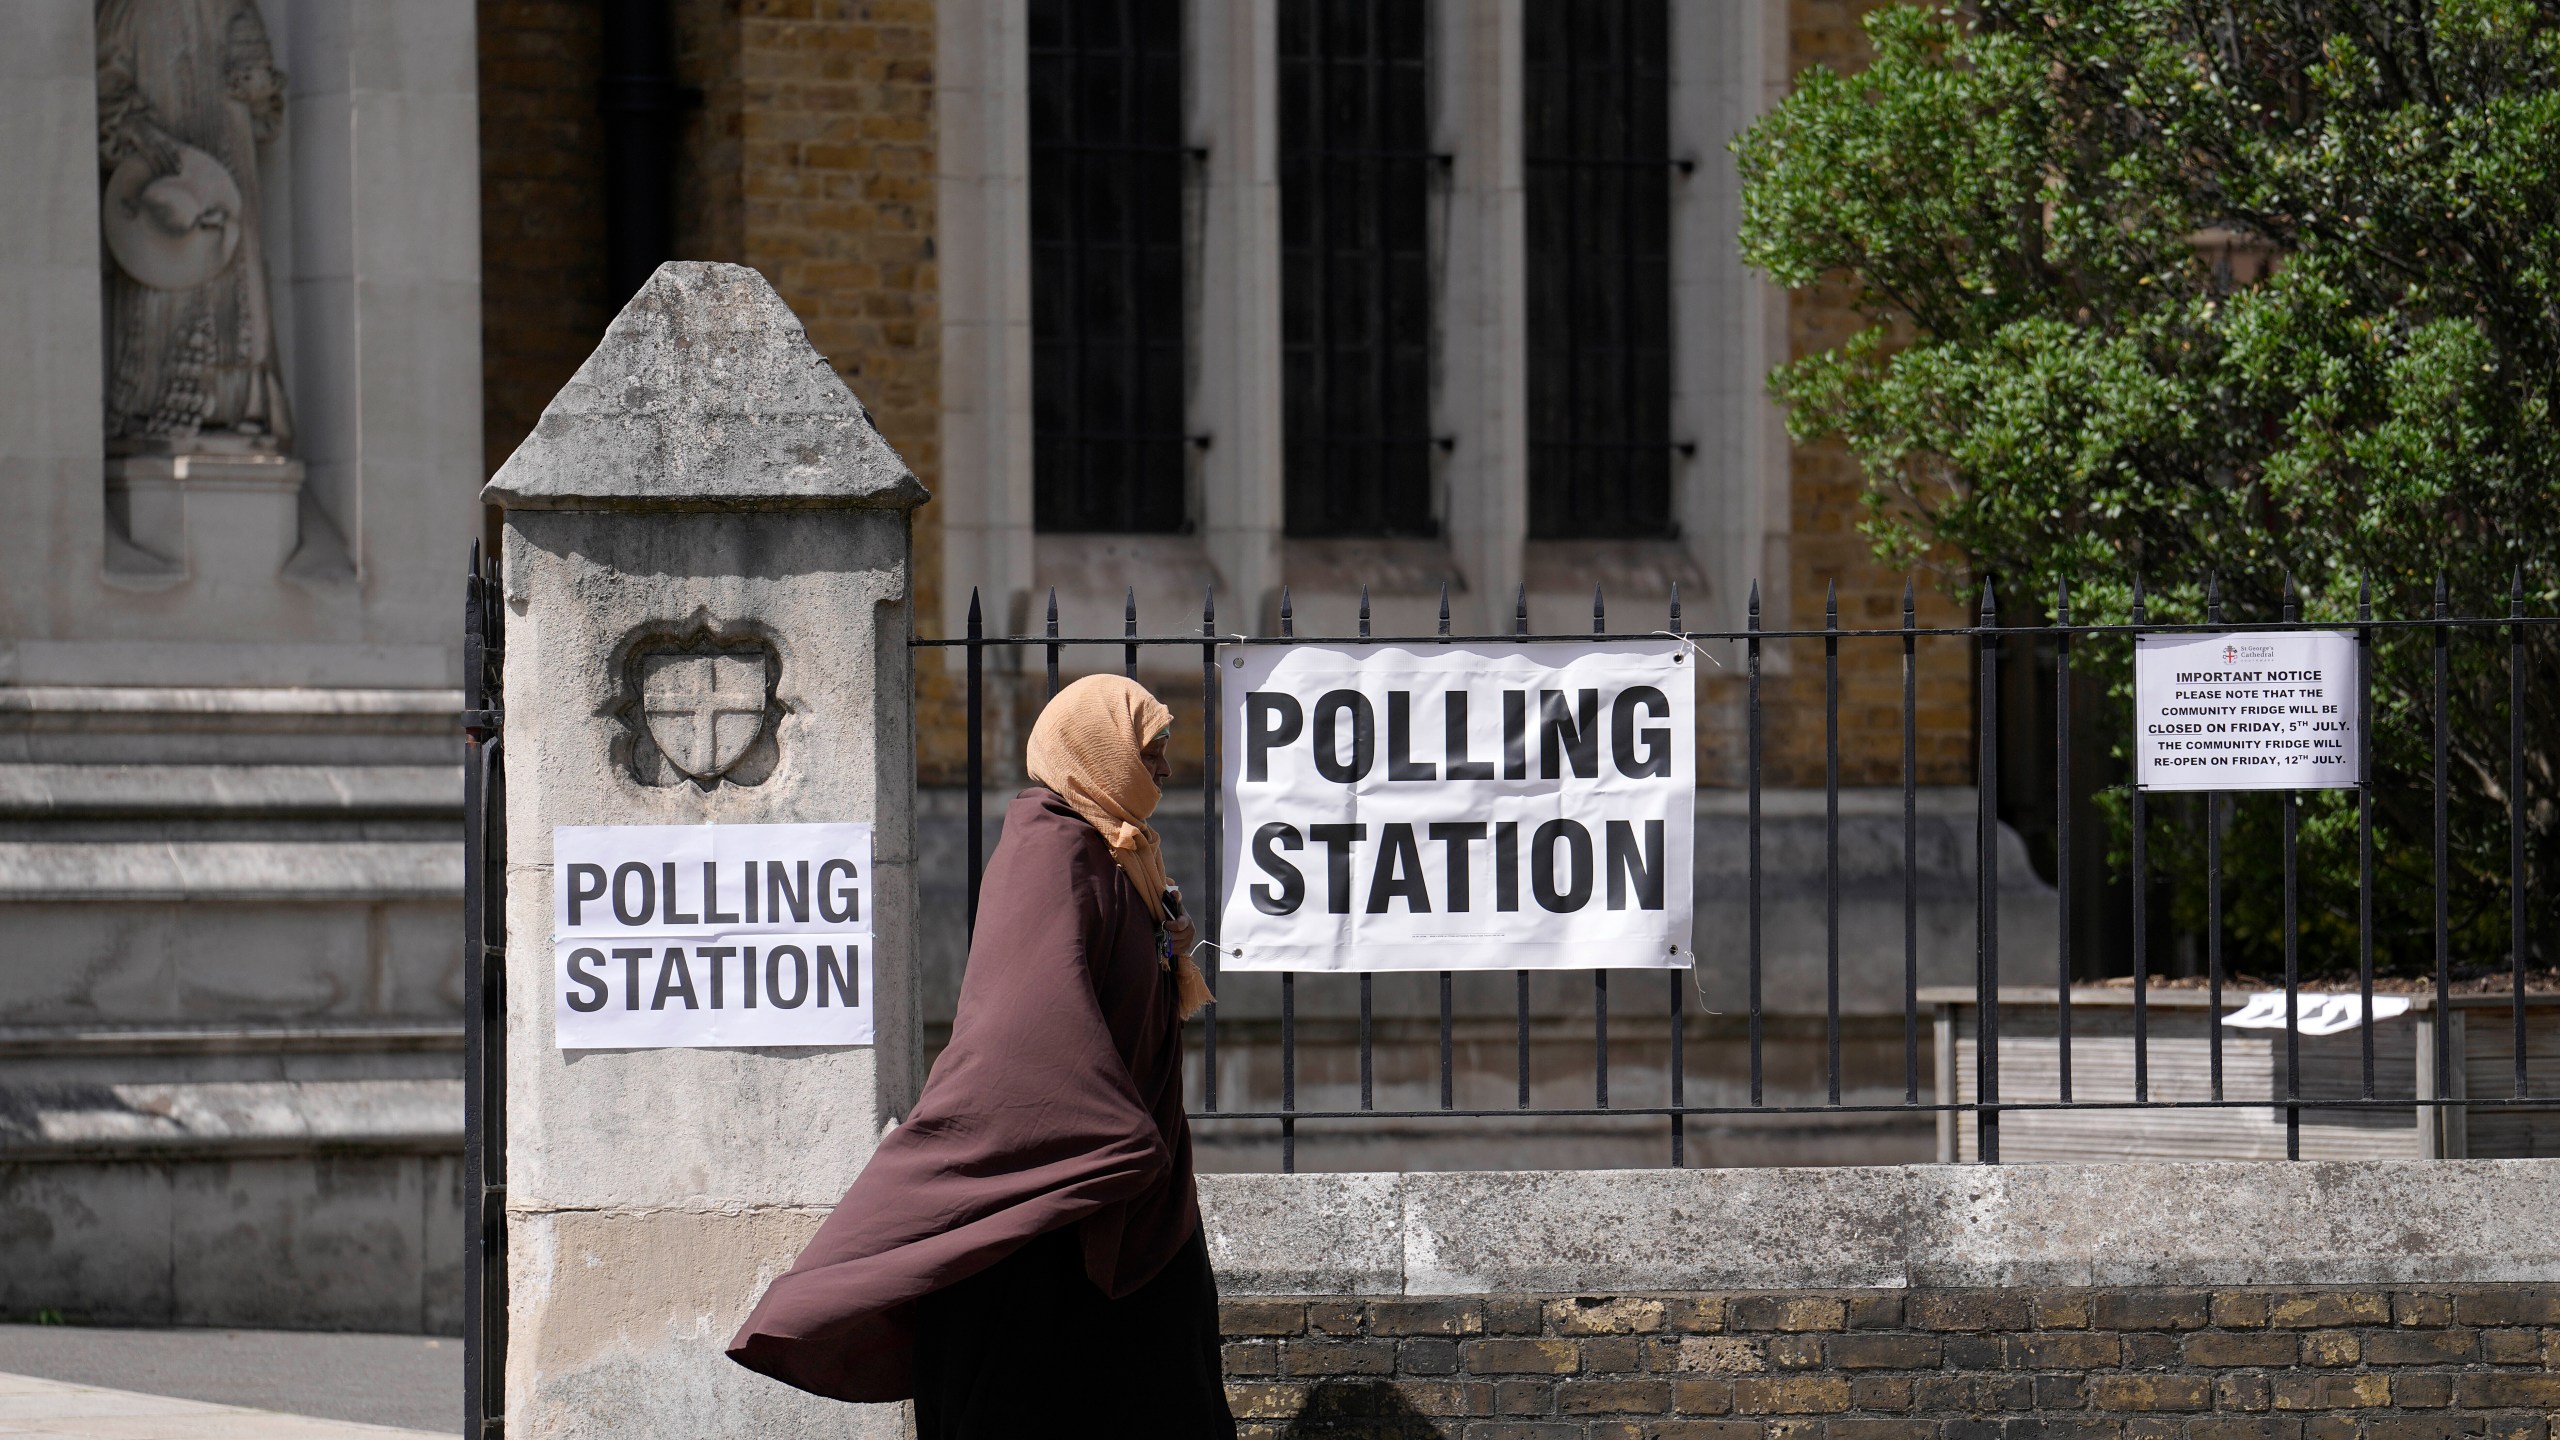 A woman leaves after casting her vote at a polling station in London, Thursday, July 4, 2024. Voters in the U.K. are casting their ballots in a national election to choose the 650 lawmakers who will sit in Parliament for the next five years. Outgoing Prime Minister Rishi Sunak surprised his own party on May 22 when he called the election. (AP Photo/Vadim Ghirda)